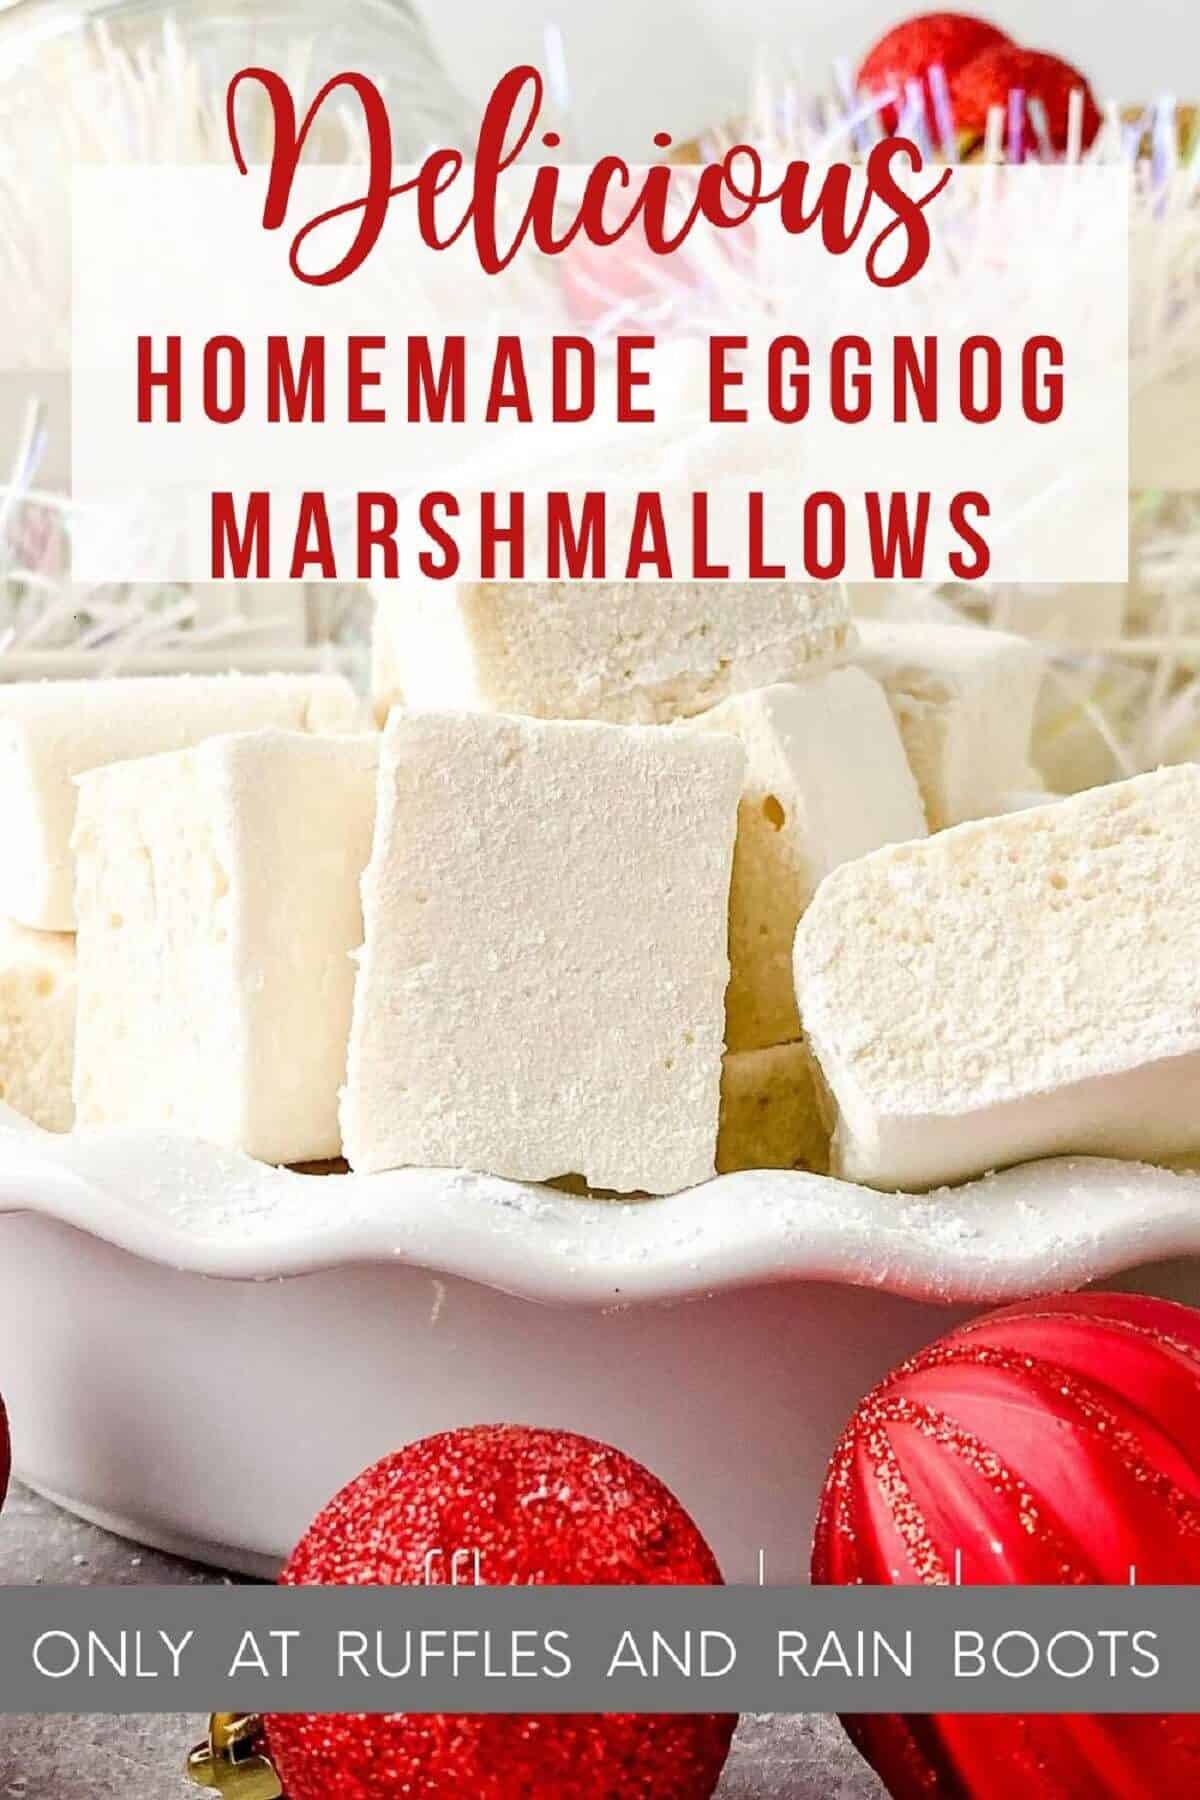 Ten homemade eggnog marshmallows in a white ruffled bowl with Christmas decor in a white basket in the background and red Christmas ornaments in the foreground on a grey marble surface.